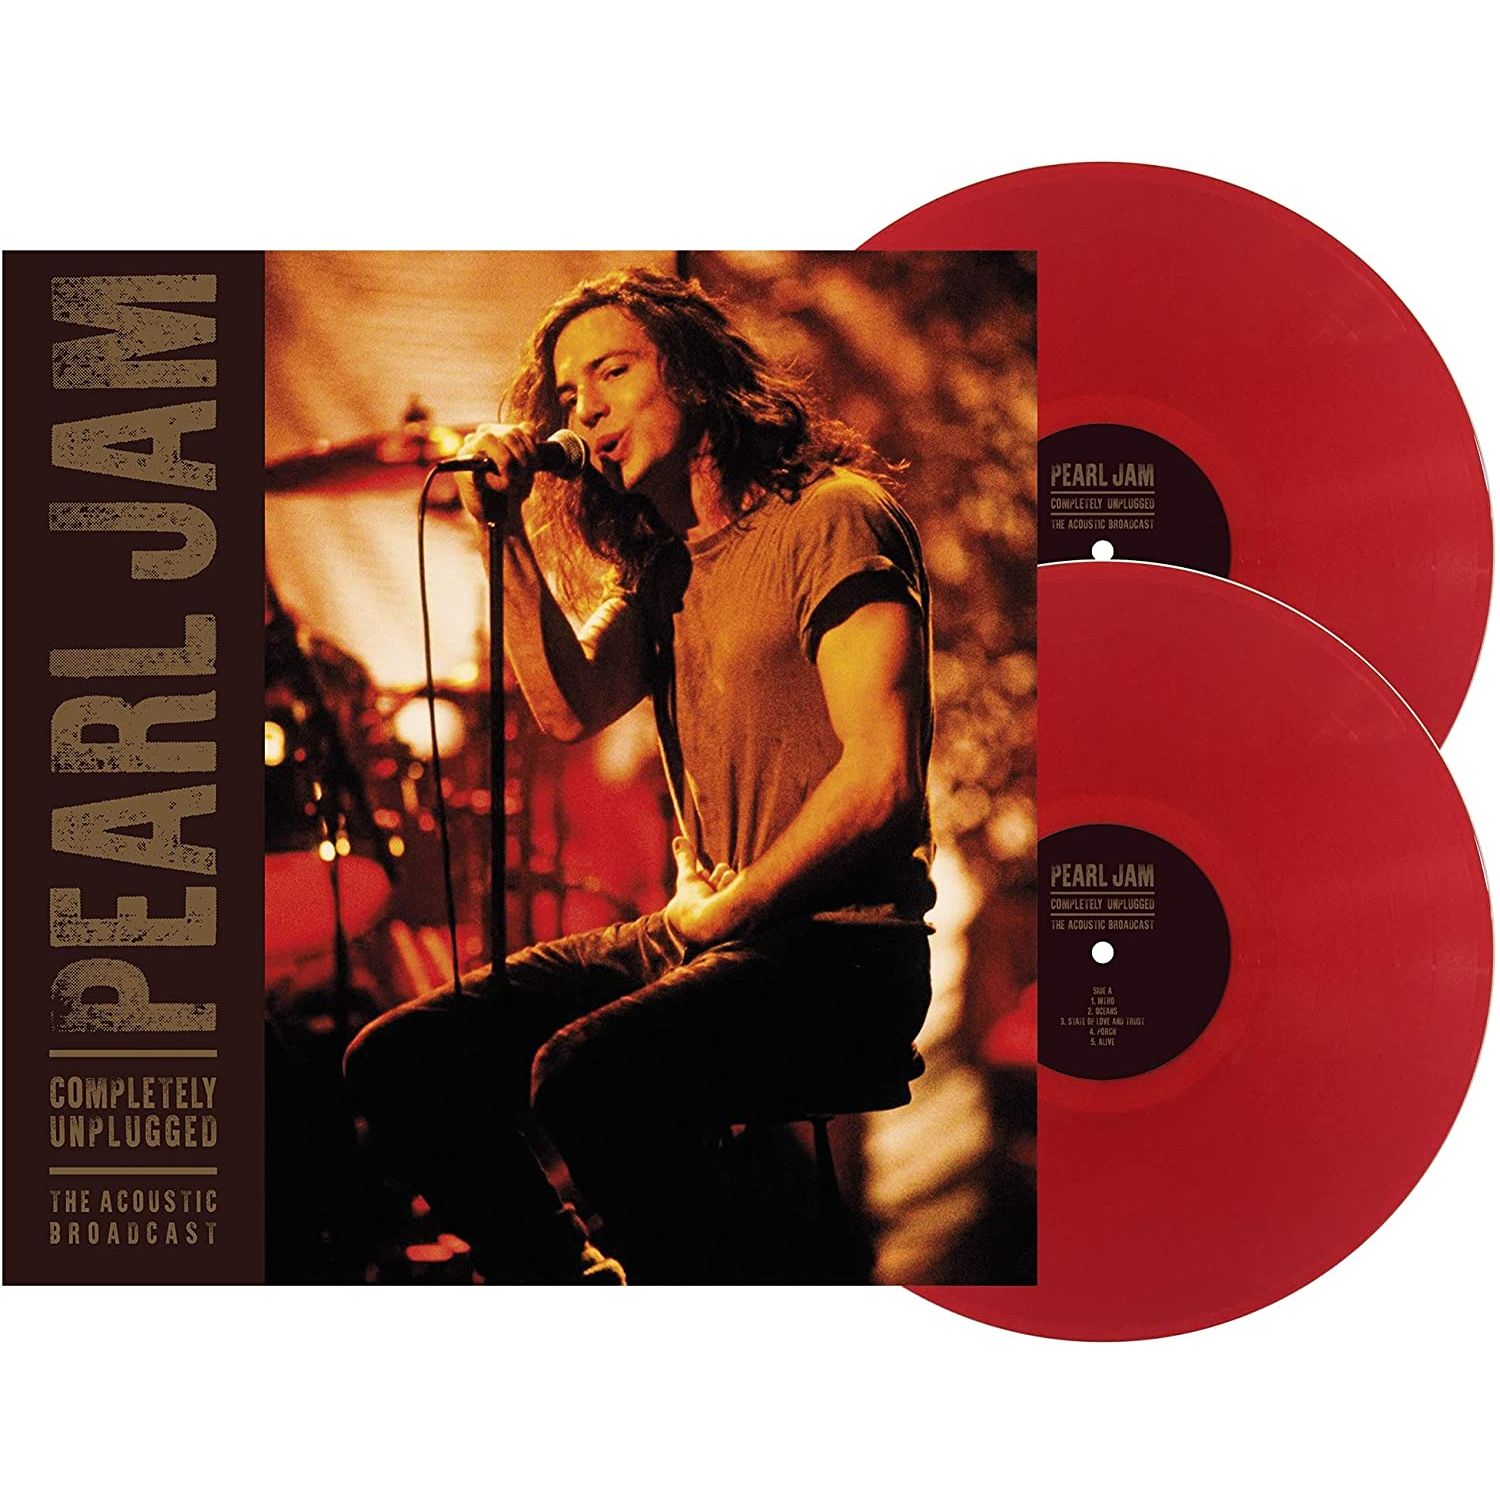 COMPLETELY UNPLUGGED - RED VINYL